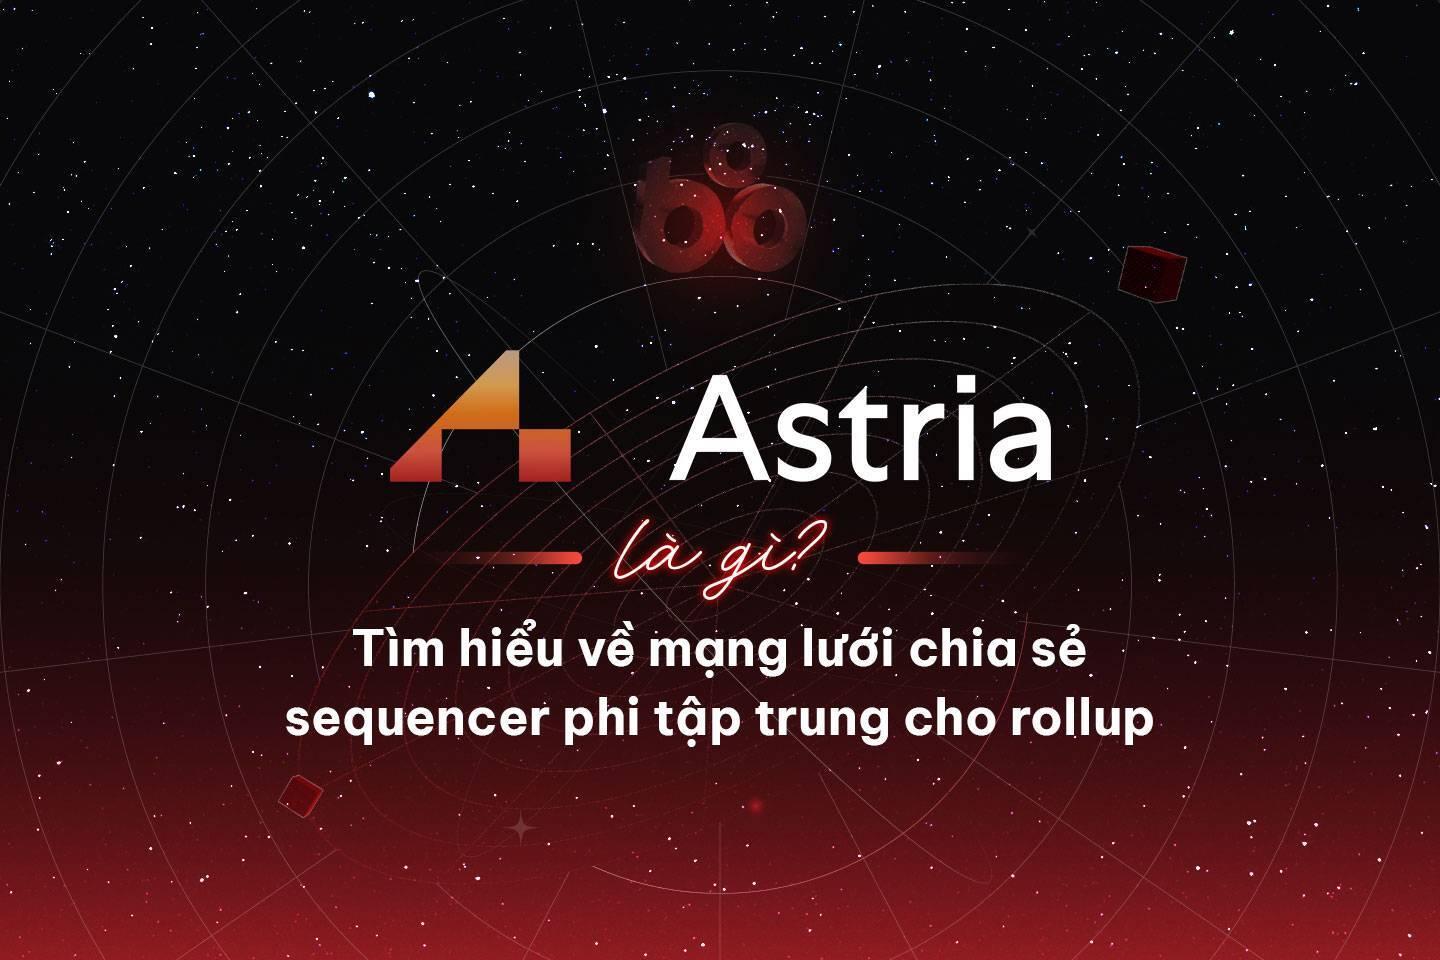 astria-la-gi-tim-hieu-ve-mang-luoi-chia-se-sequencer-phi-tap-trung-cho-rollup